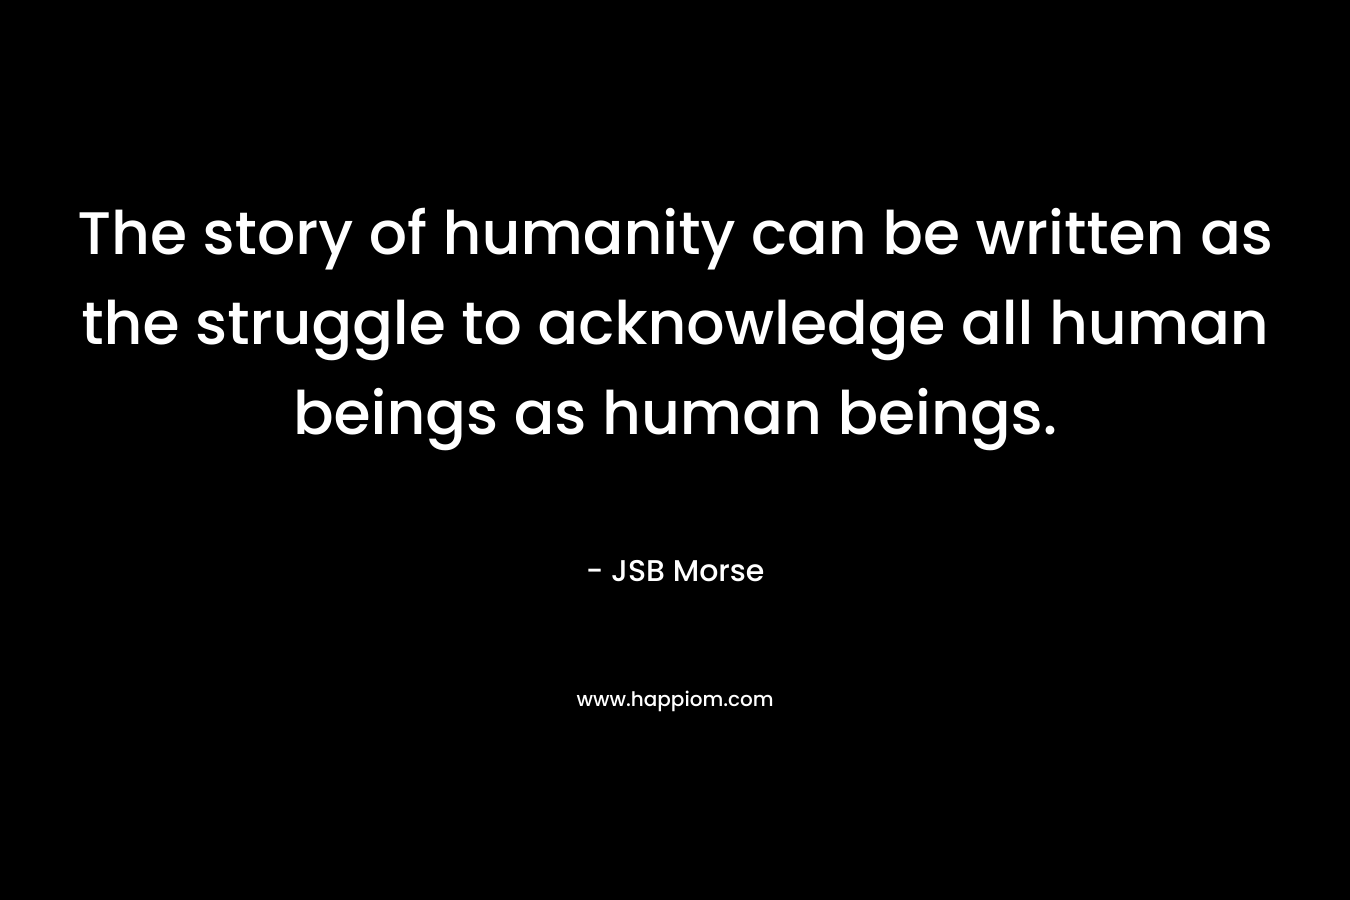 The story of humanity can be written as the struggle to acknowledge all human beings as human beings.